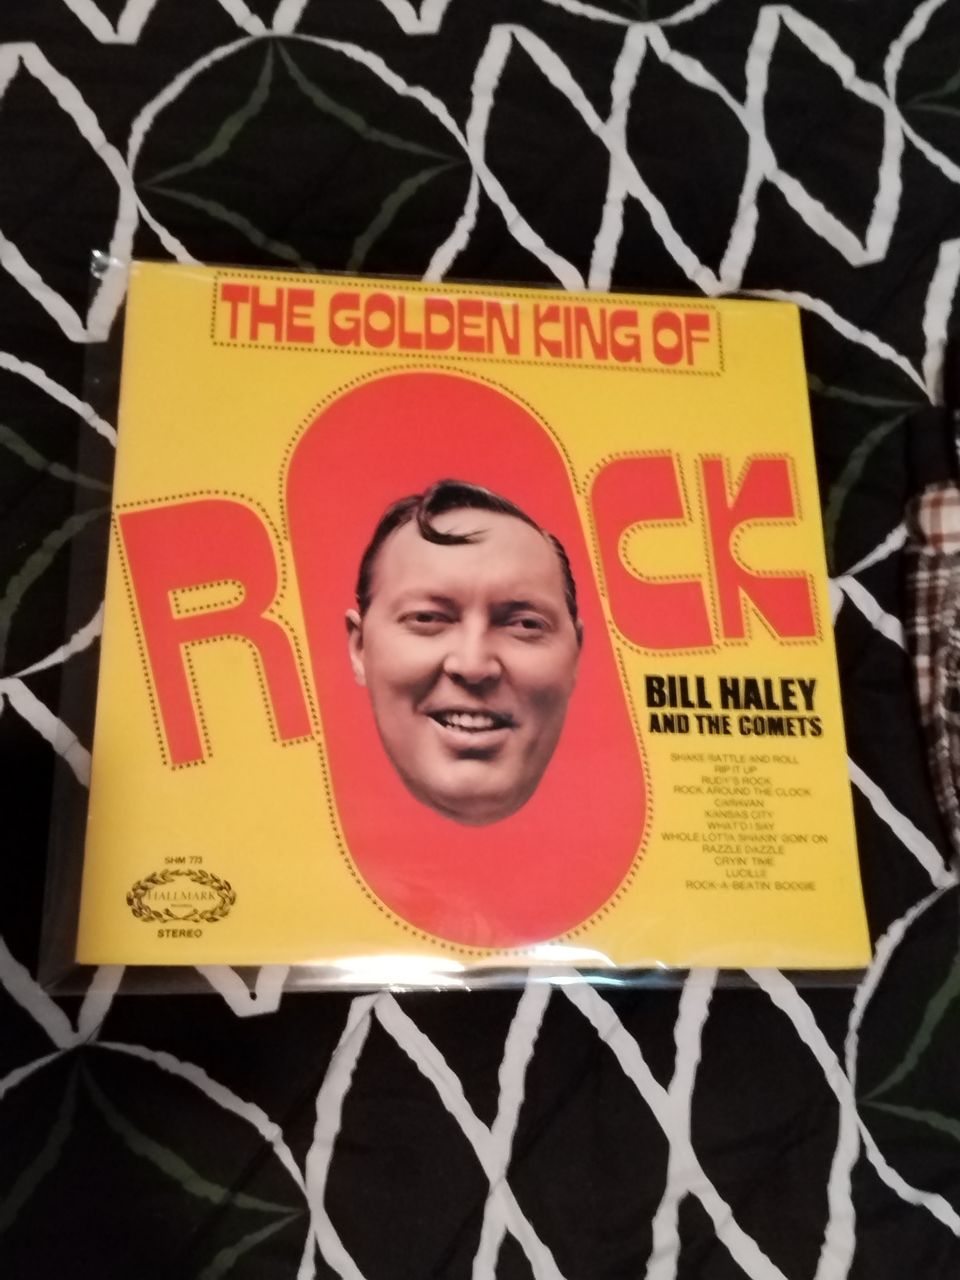 BILL HALEY AND THE GOMETS King Of Rock